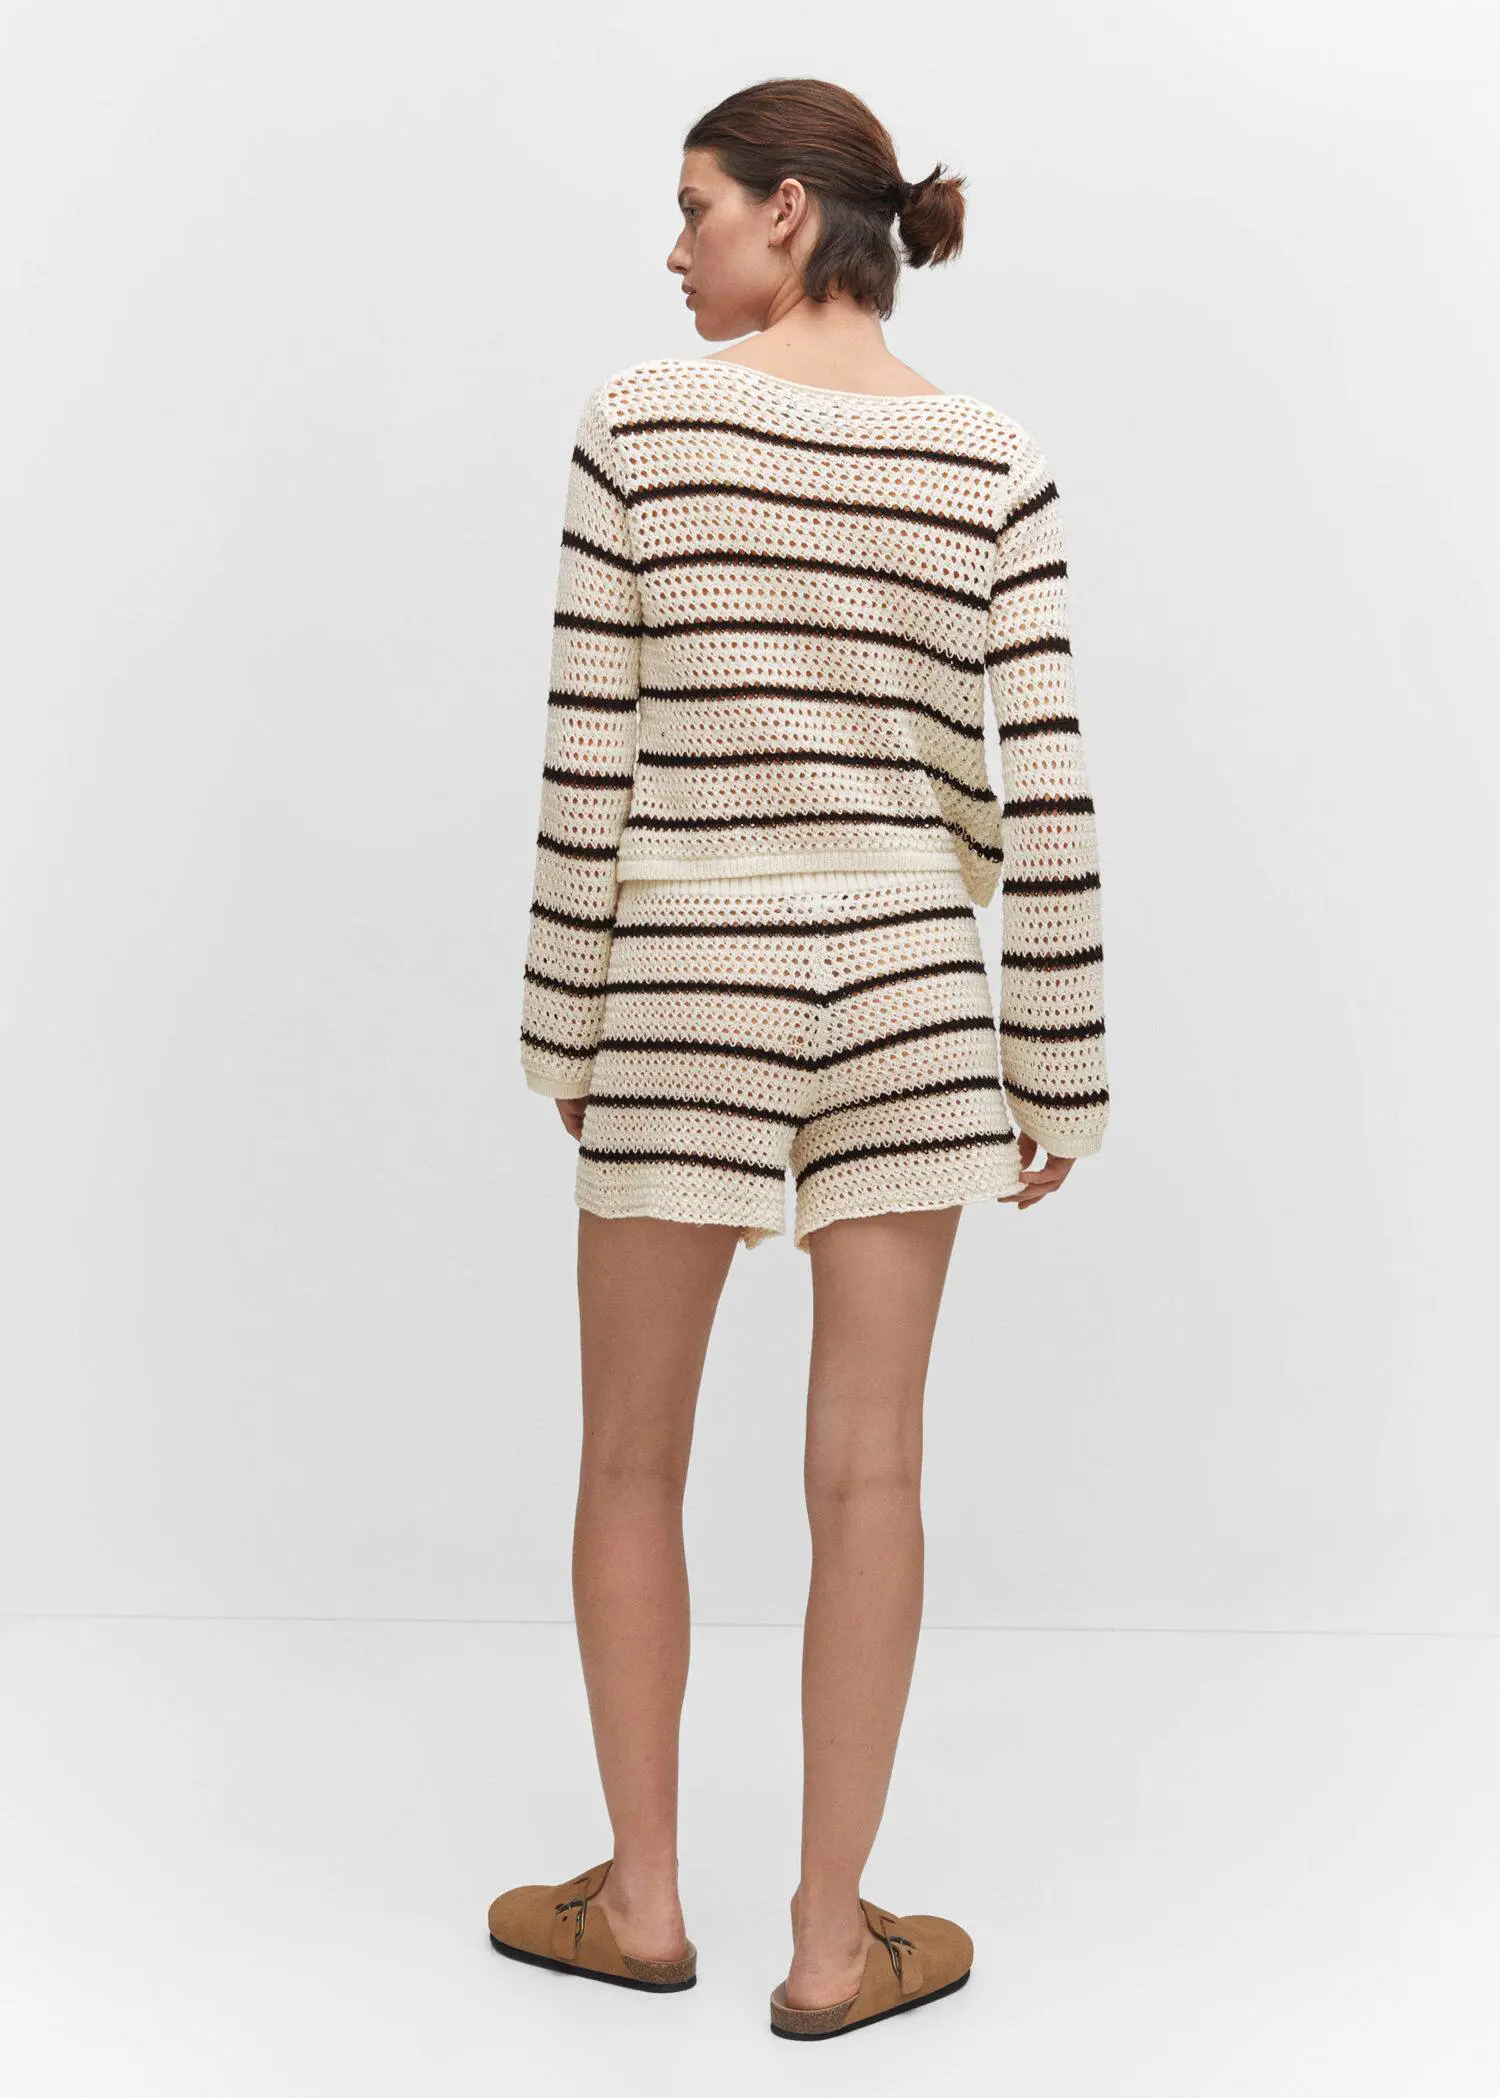 Mango Openwork knitted shorts. a woman wearing a striped sweater and shorts. 